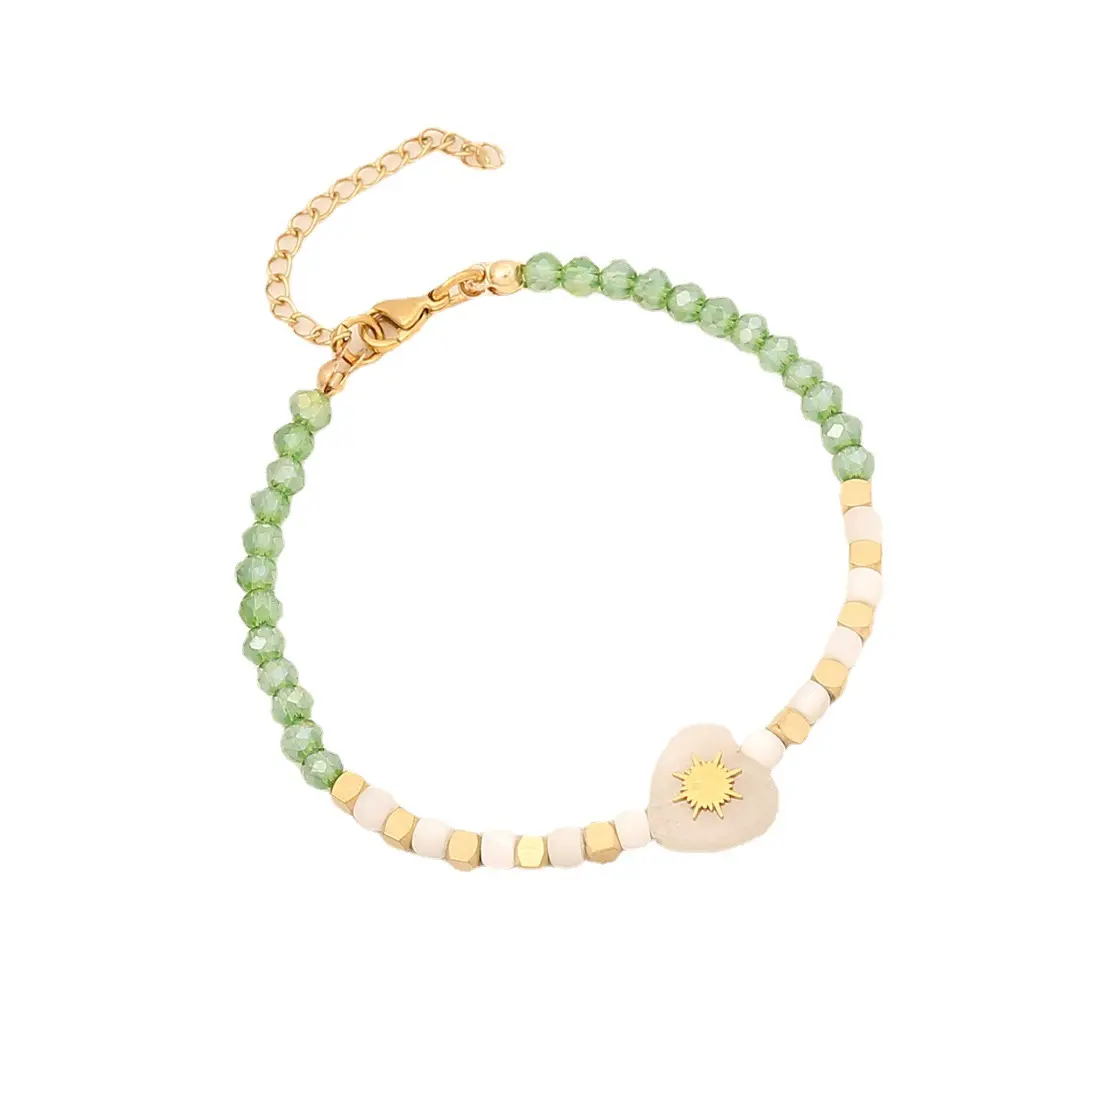 Uniquely Designed Stacking Bracelet Assorted Faceted Crystal Beads Heart Center Charm Gold Stainless Steel Spacers Bracelet